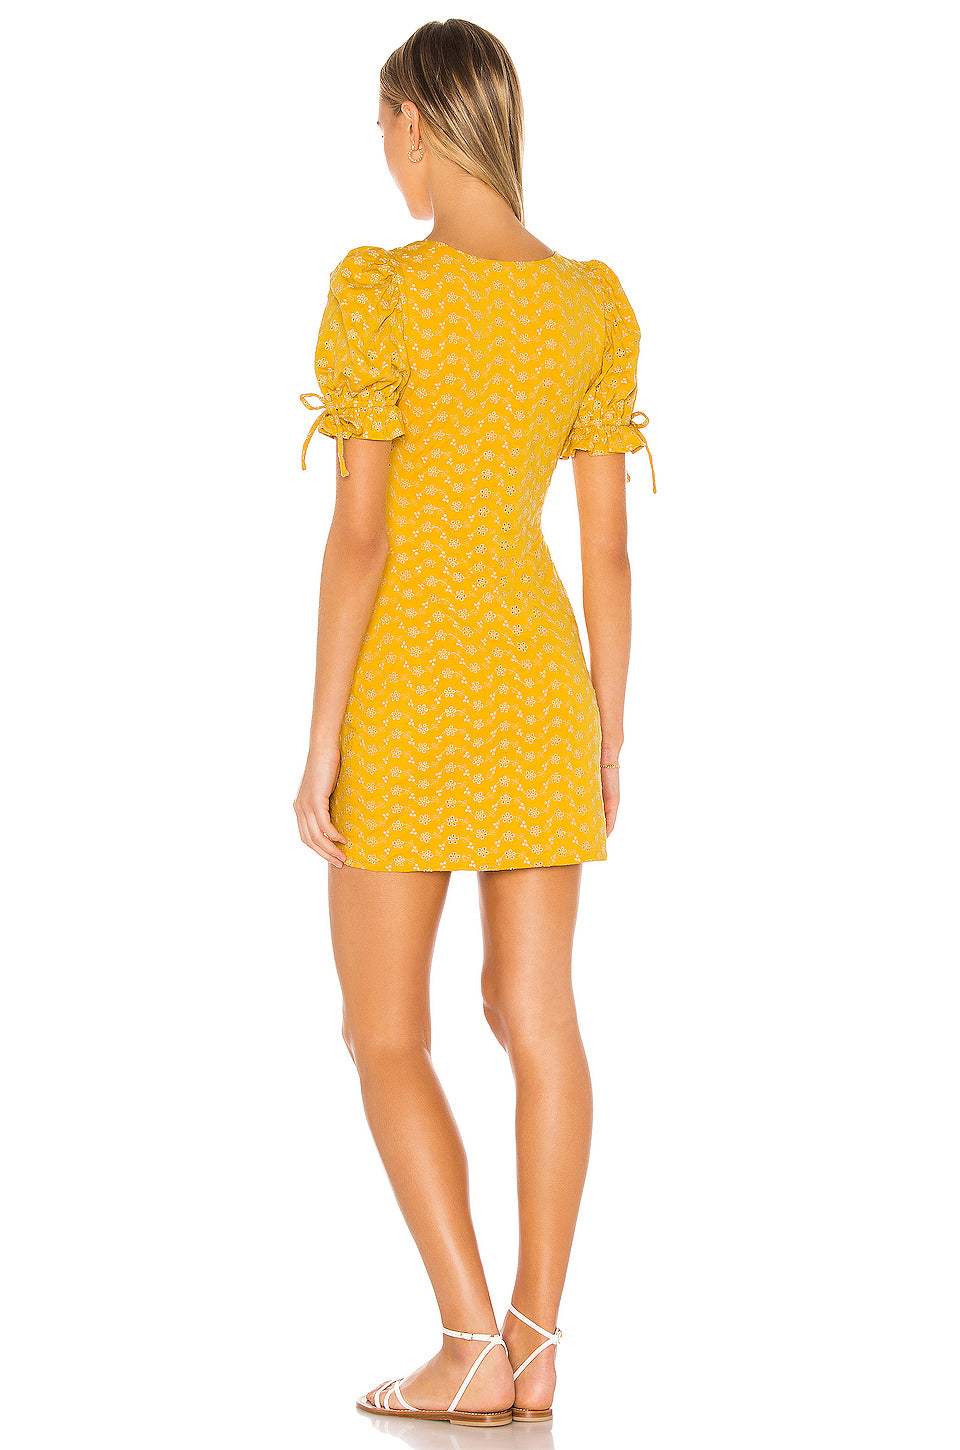 Penny Dress in GOLDEN YELLOW